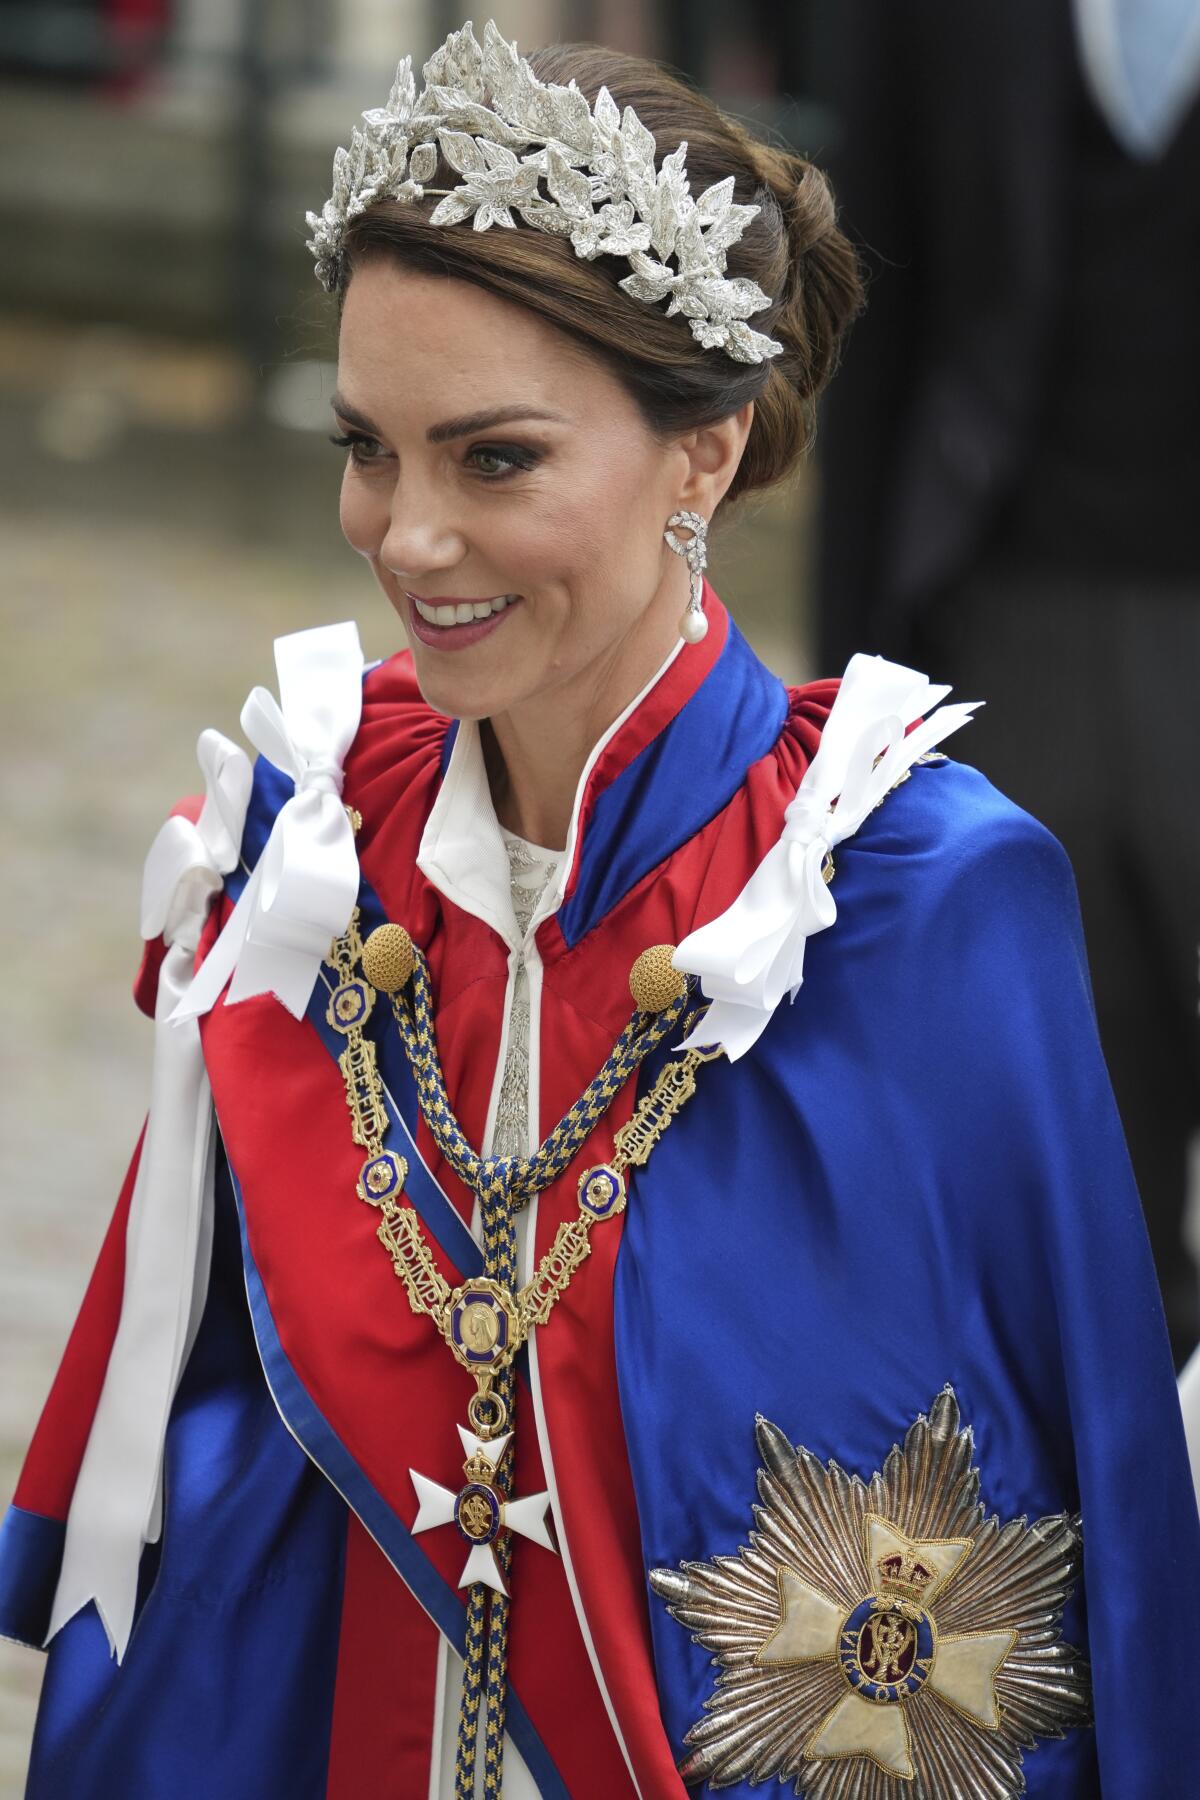 The Princess of Wales in regal robes.